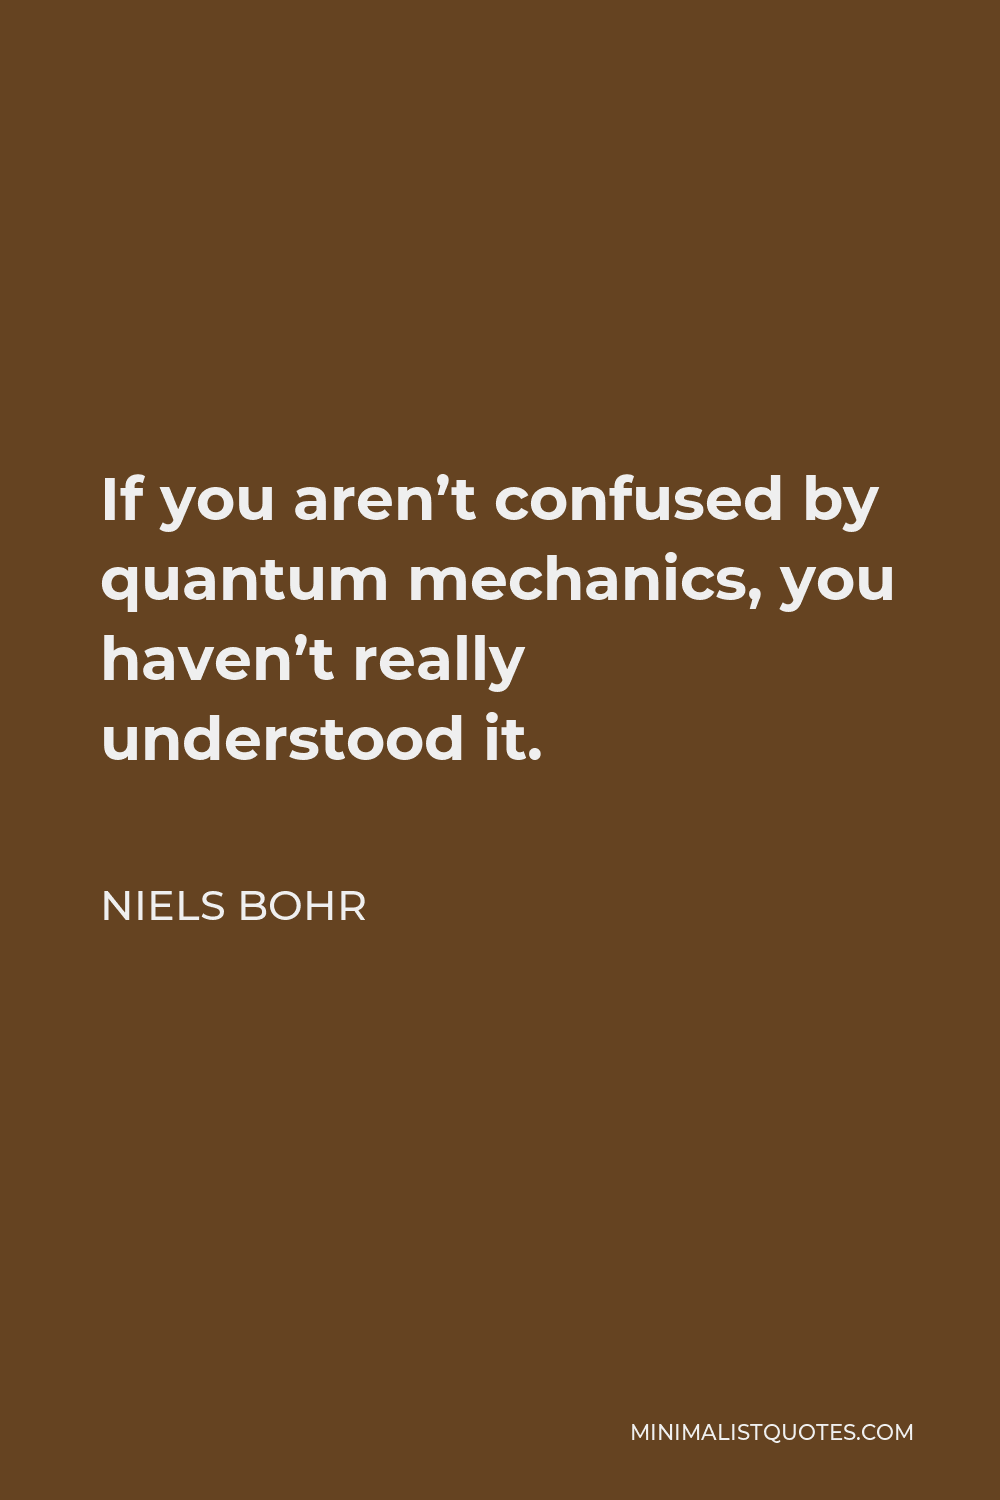 Niels Bohr Quote: If you aren't confused by quantum mechanics, you haven't  really understood it.